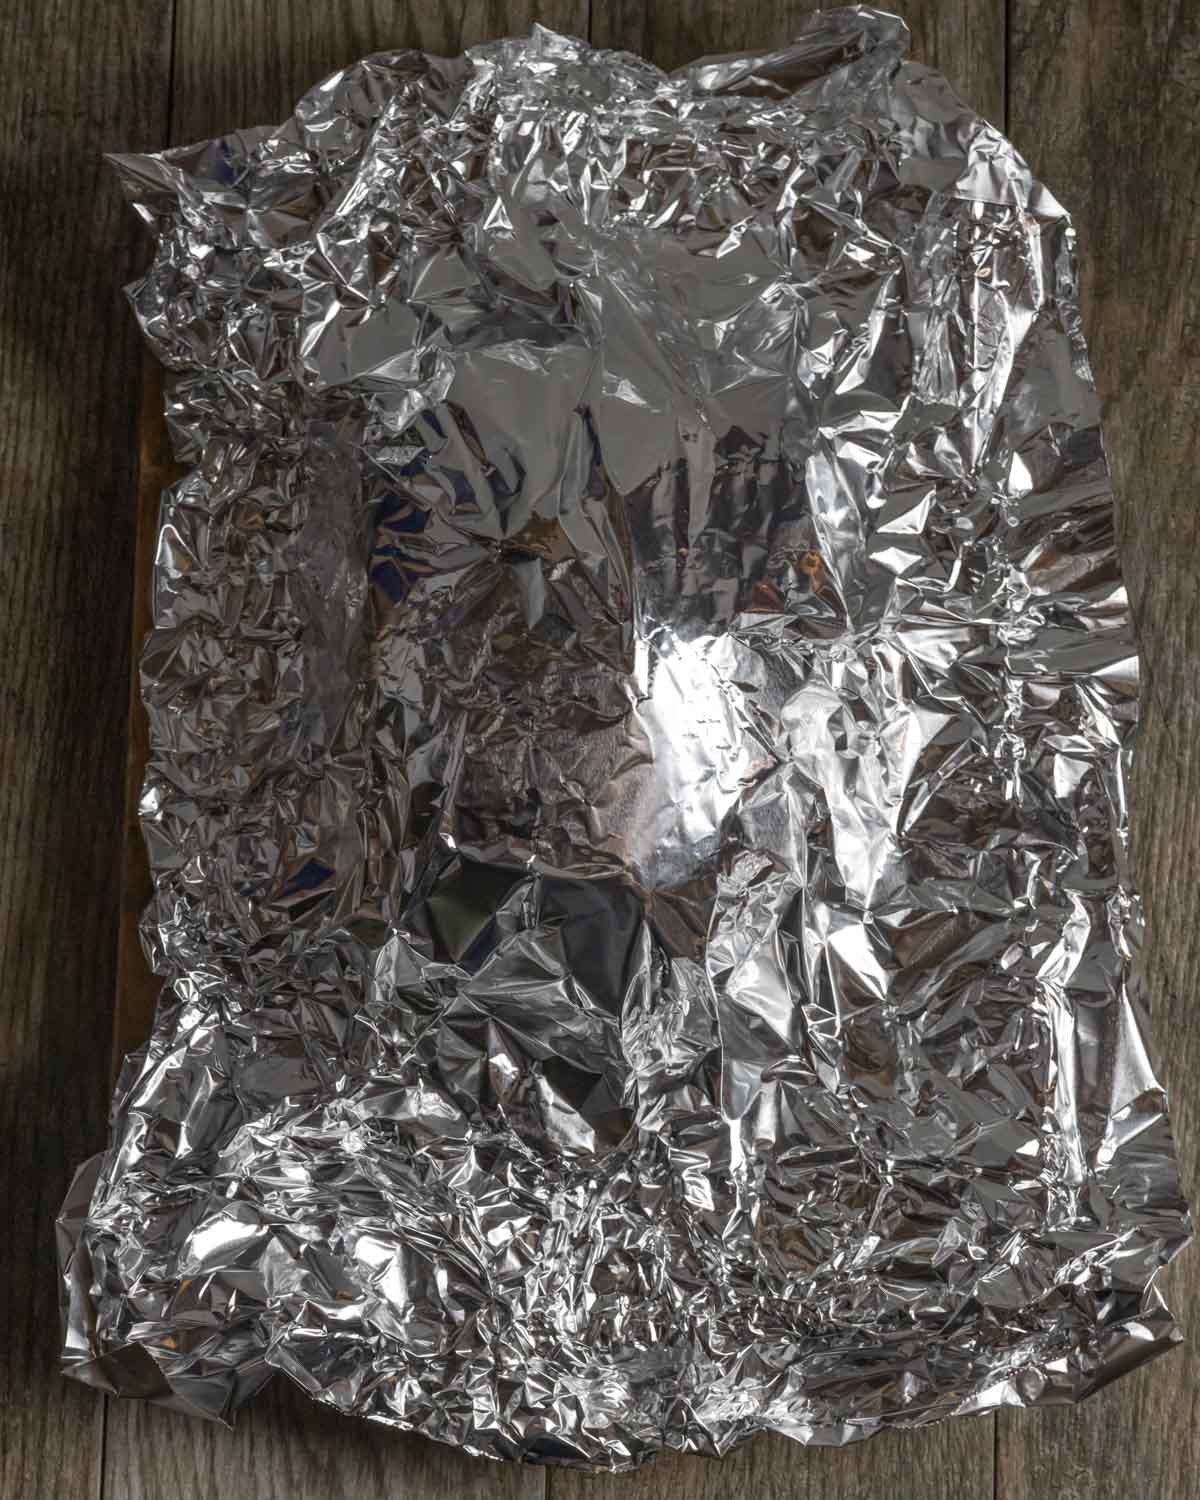 Lamb leg roast resting on a sheet pan covered with foil.